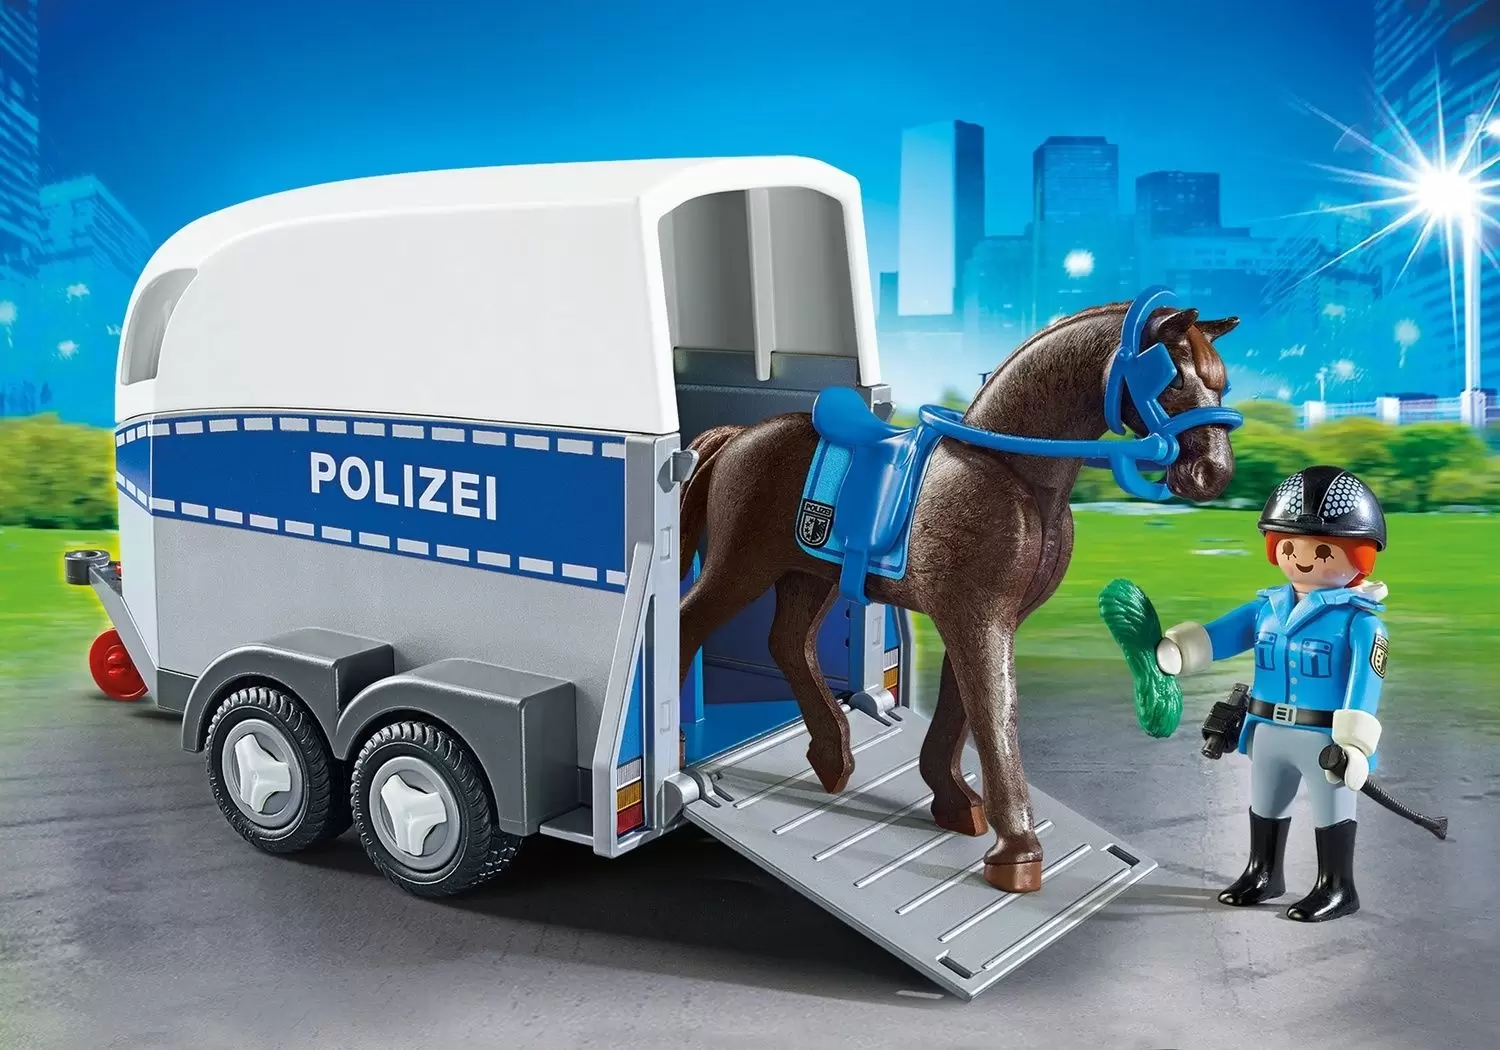 Police Playmobil - Mounted police with trailer (Polizei)